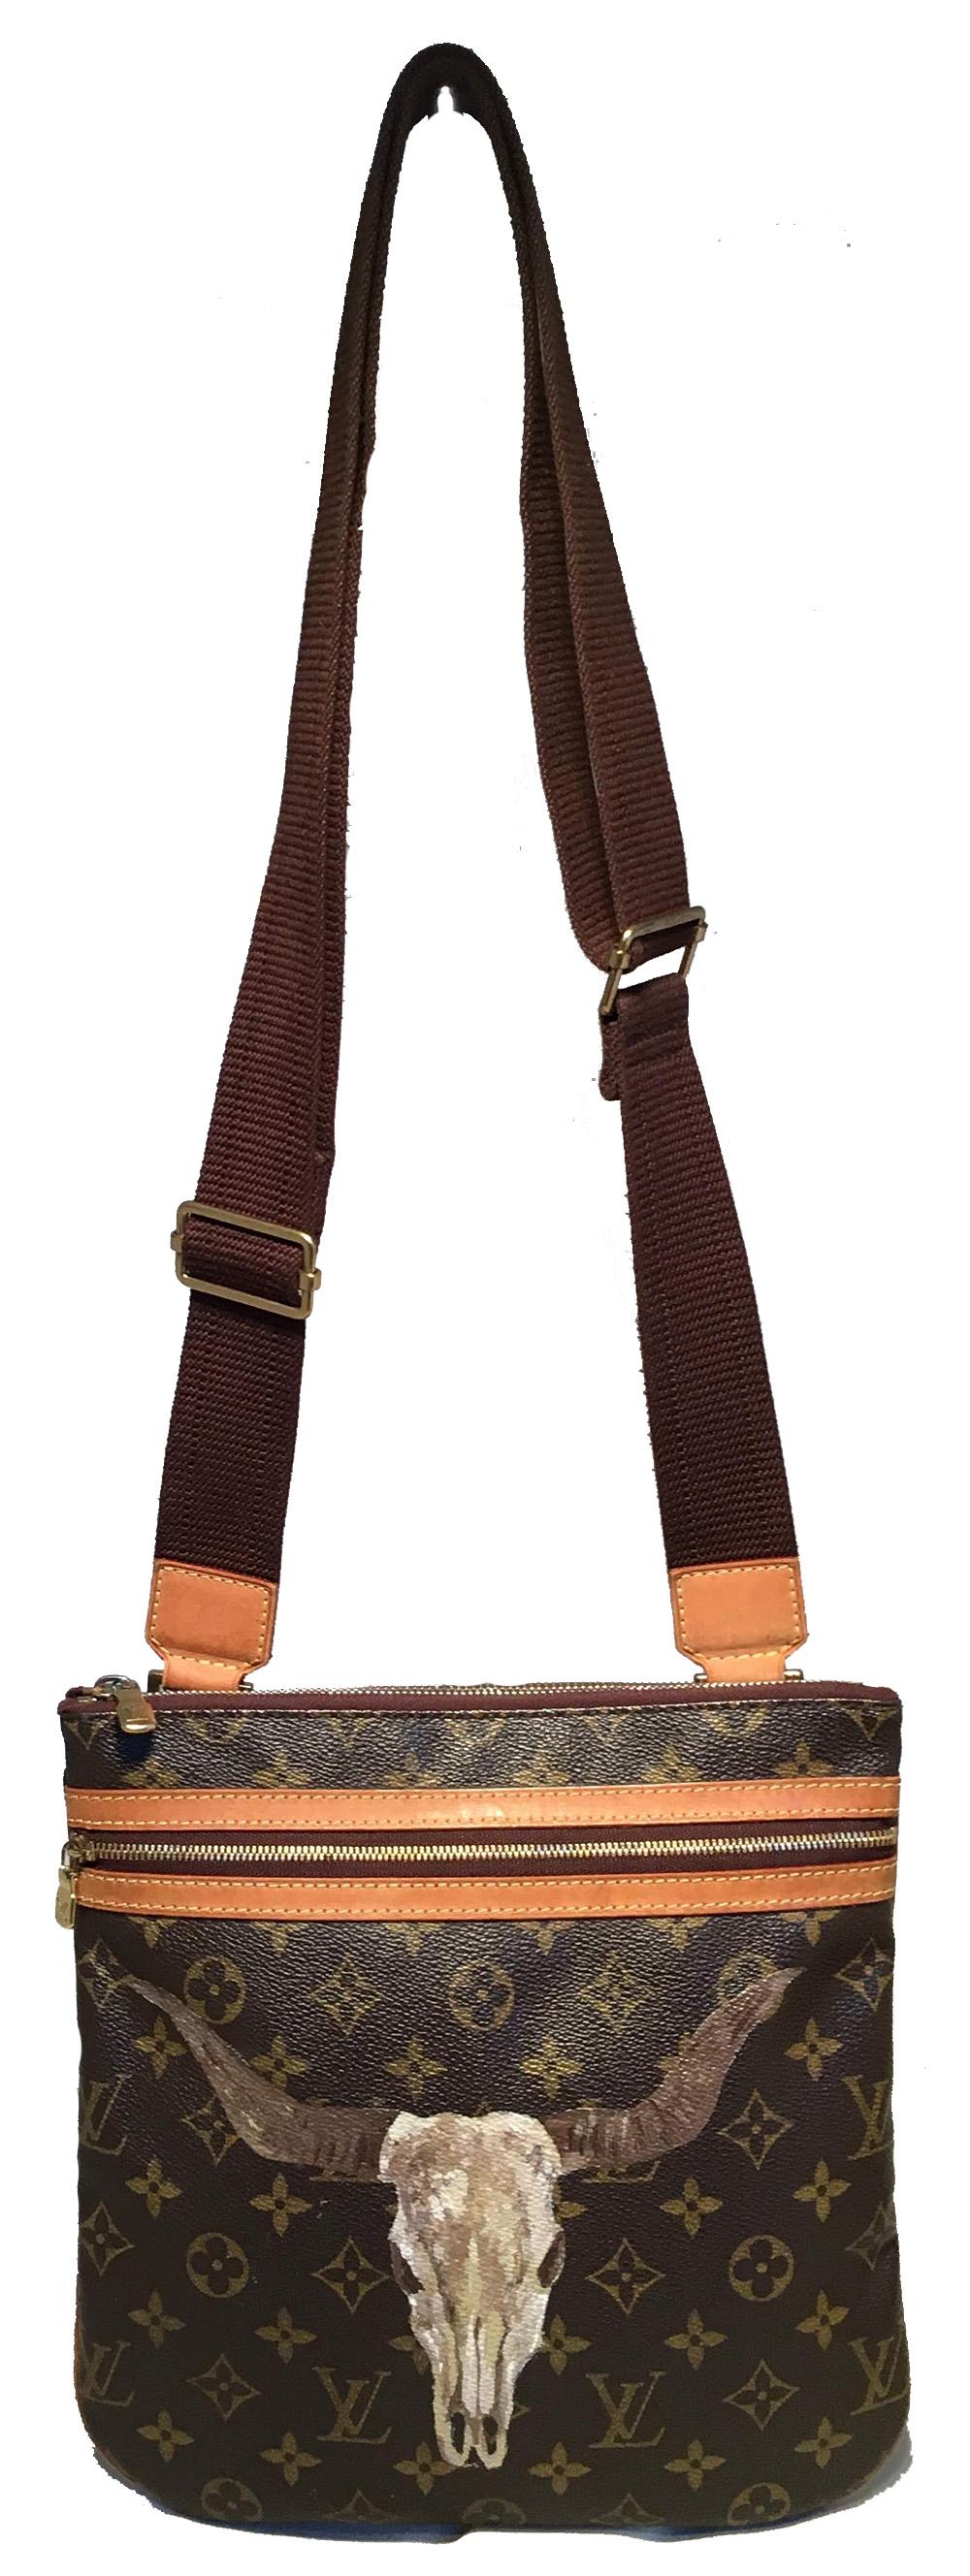 Louis Vuitton Monogram Customized Hand Painted Longhorn Bosphore Crossbody Shoulder Bag in excellent condition. Monogram canvas exterior trimmed with tan leather and brass hardware. Customized, hand painted longhorn cow scull along front side by our